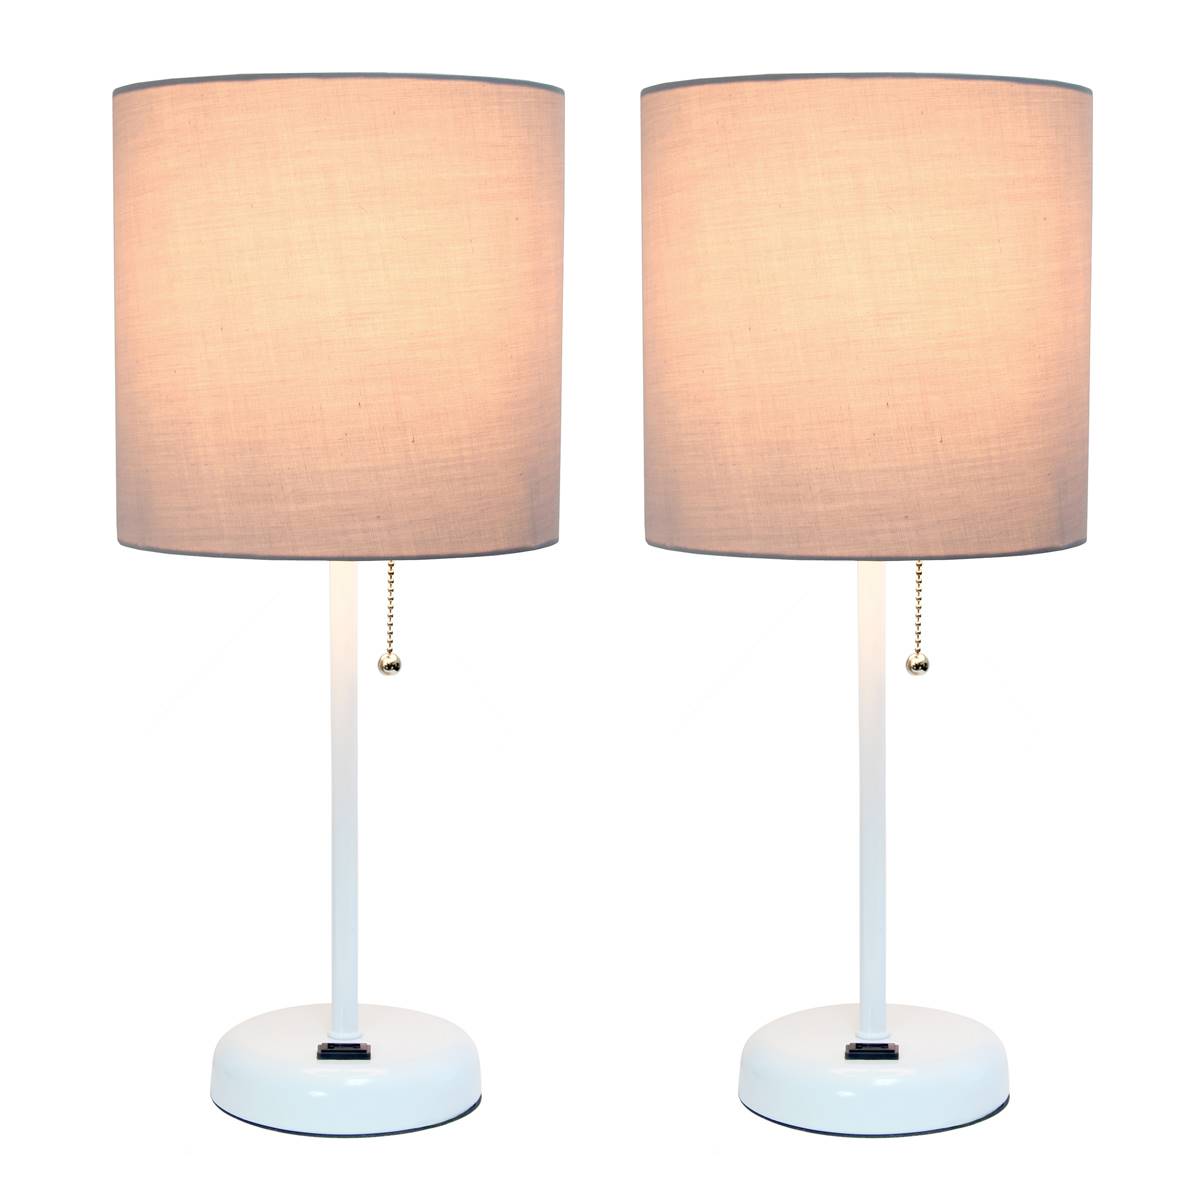 LimeLights White Stick Lamp W/Charging Outlet/Grey Shade-Set Of 2